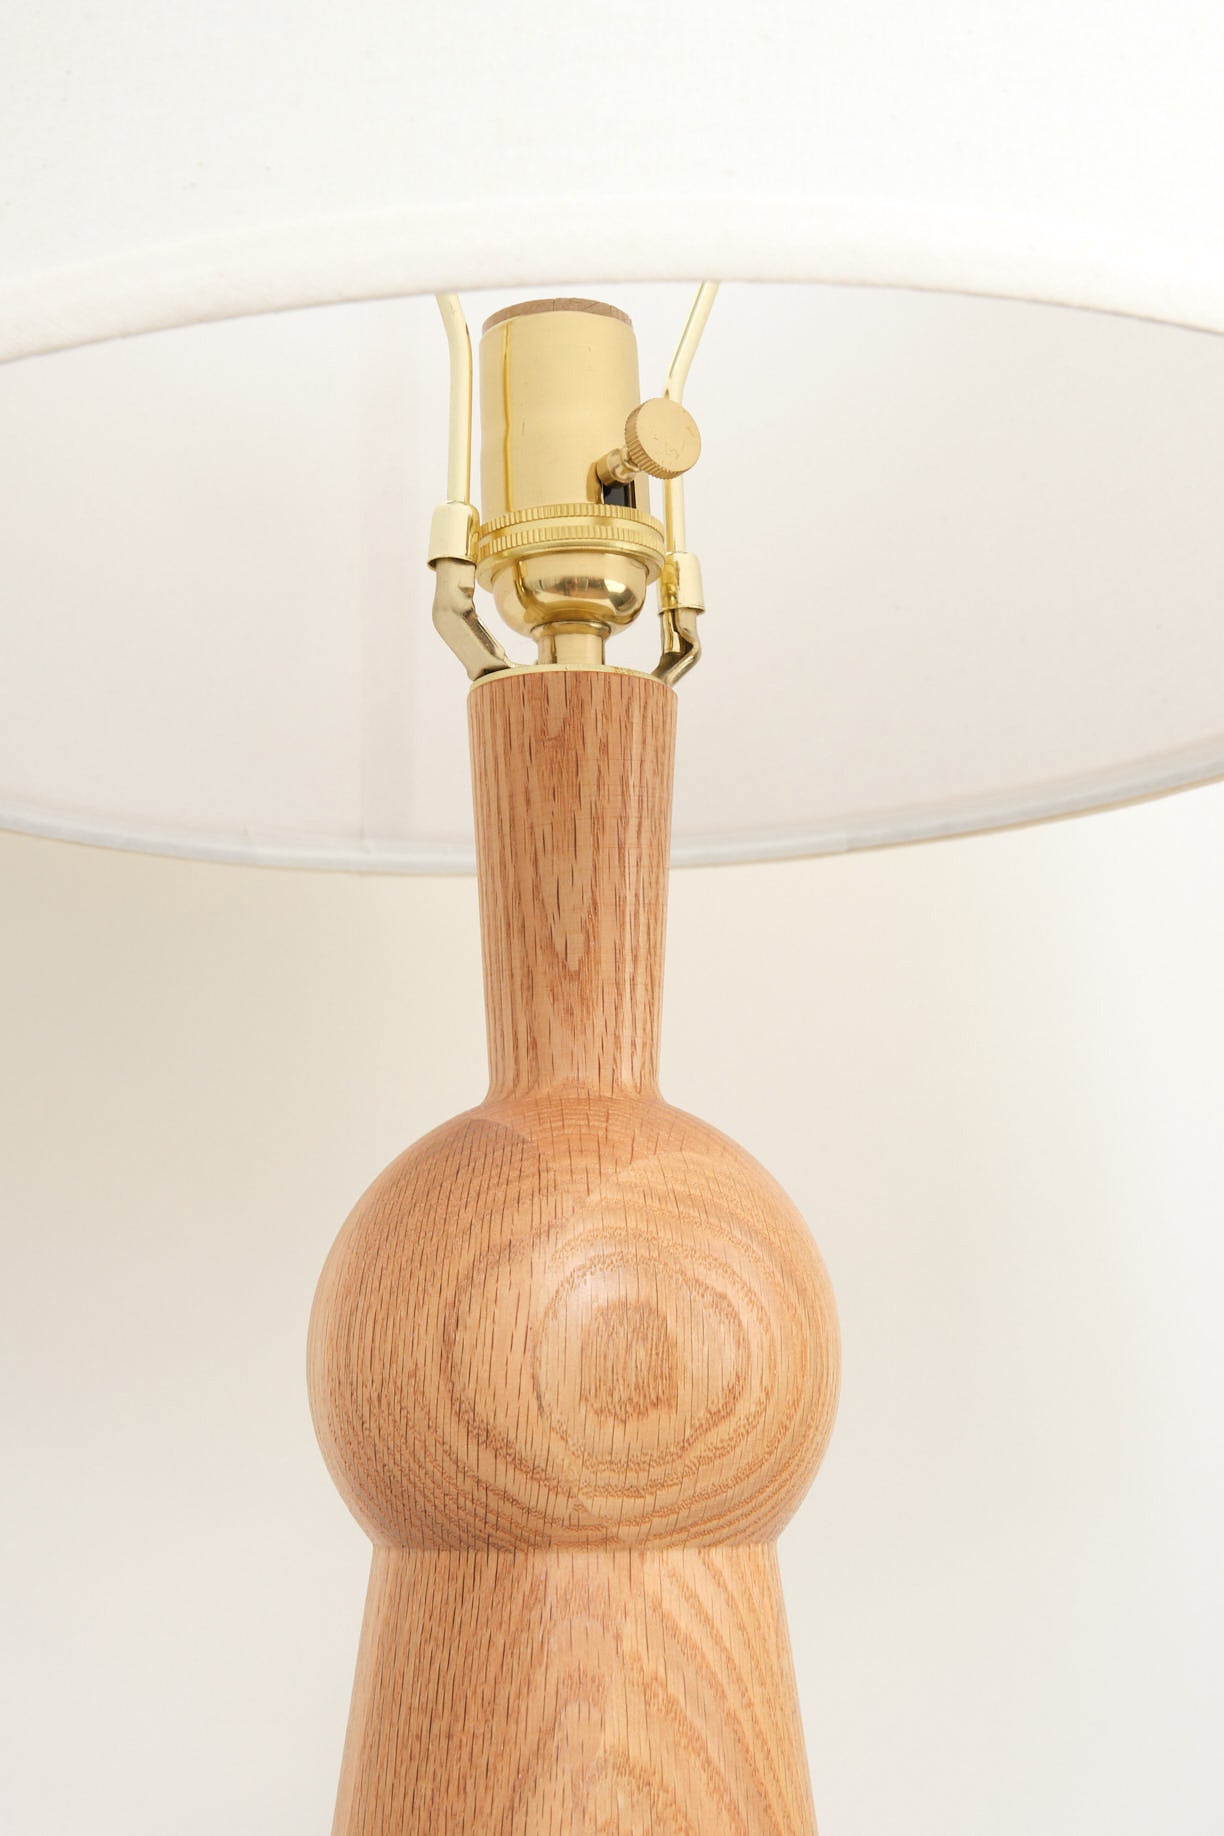 Lostine wooden table lamp